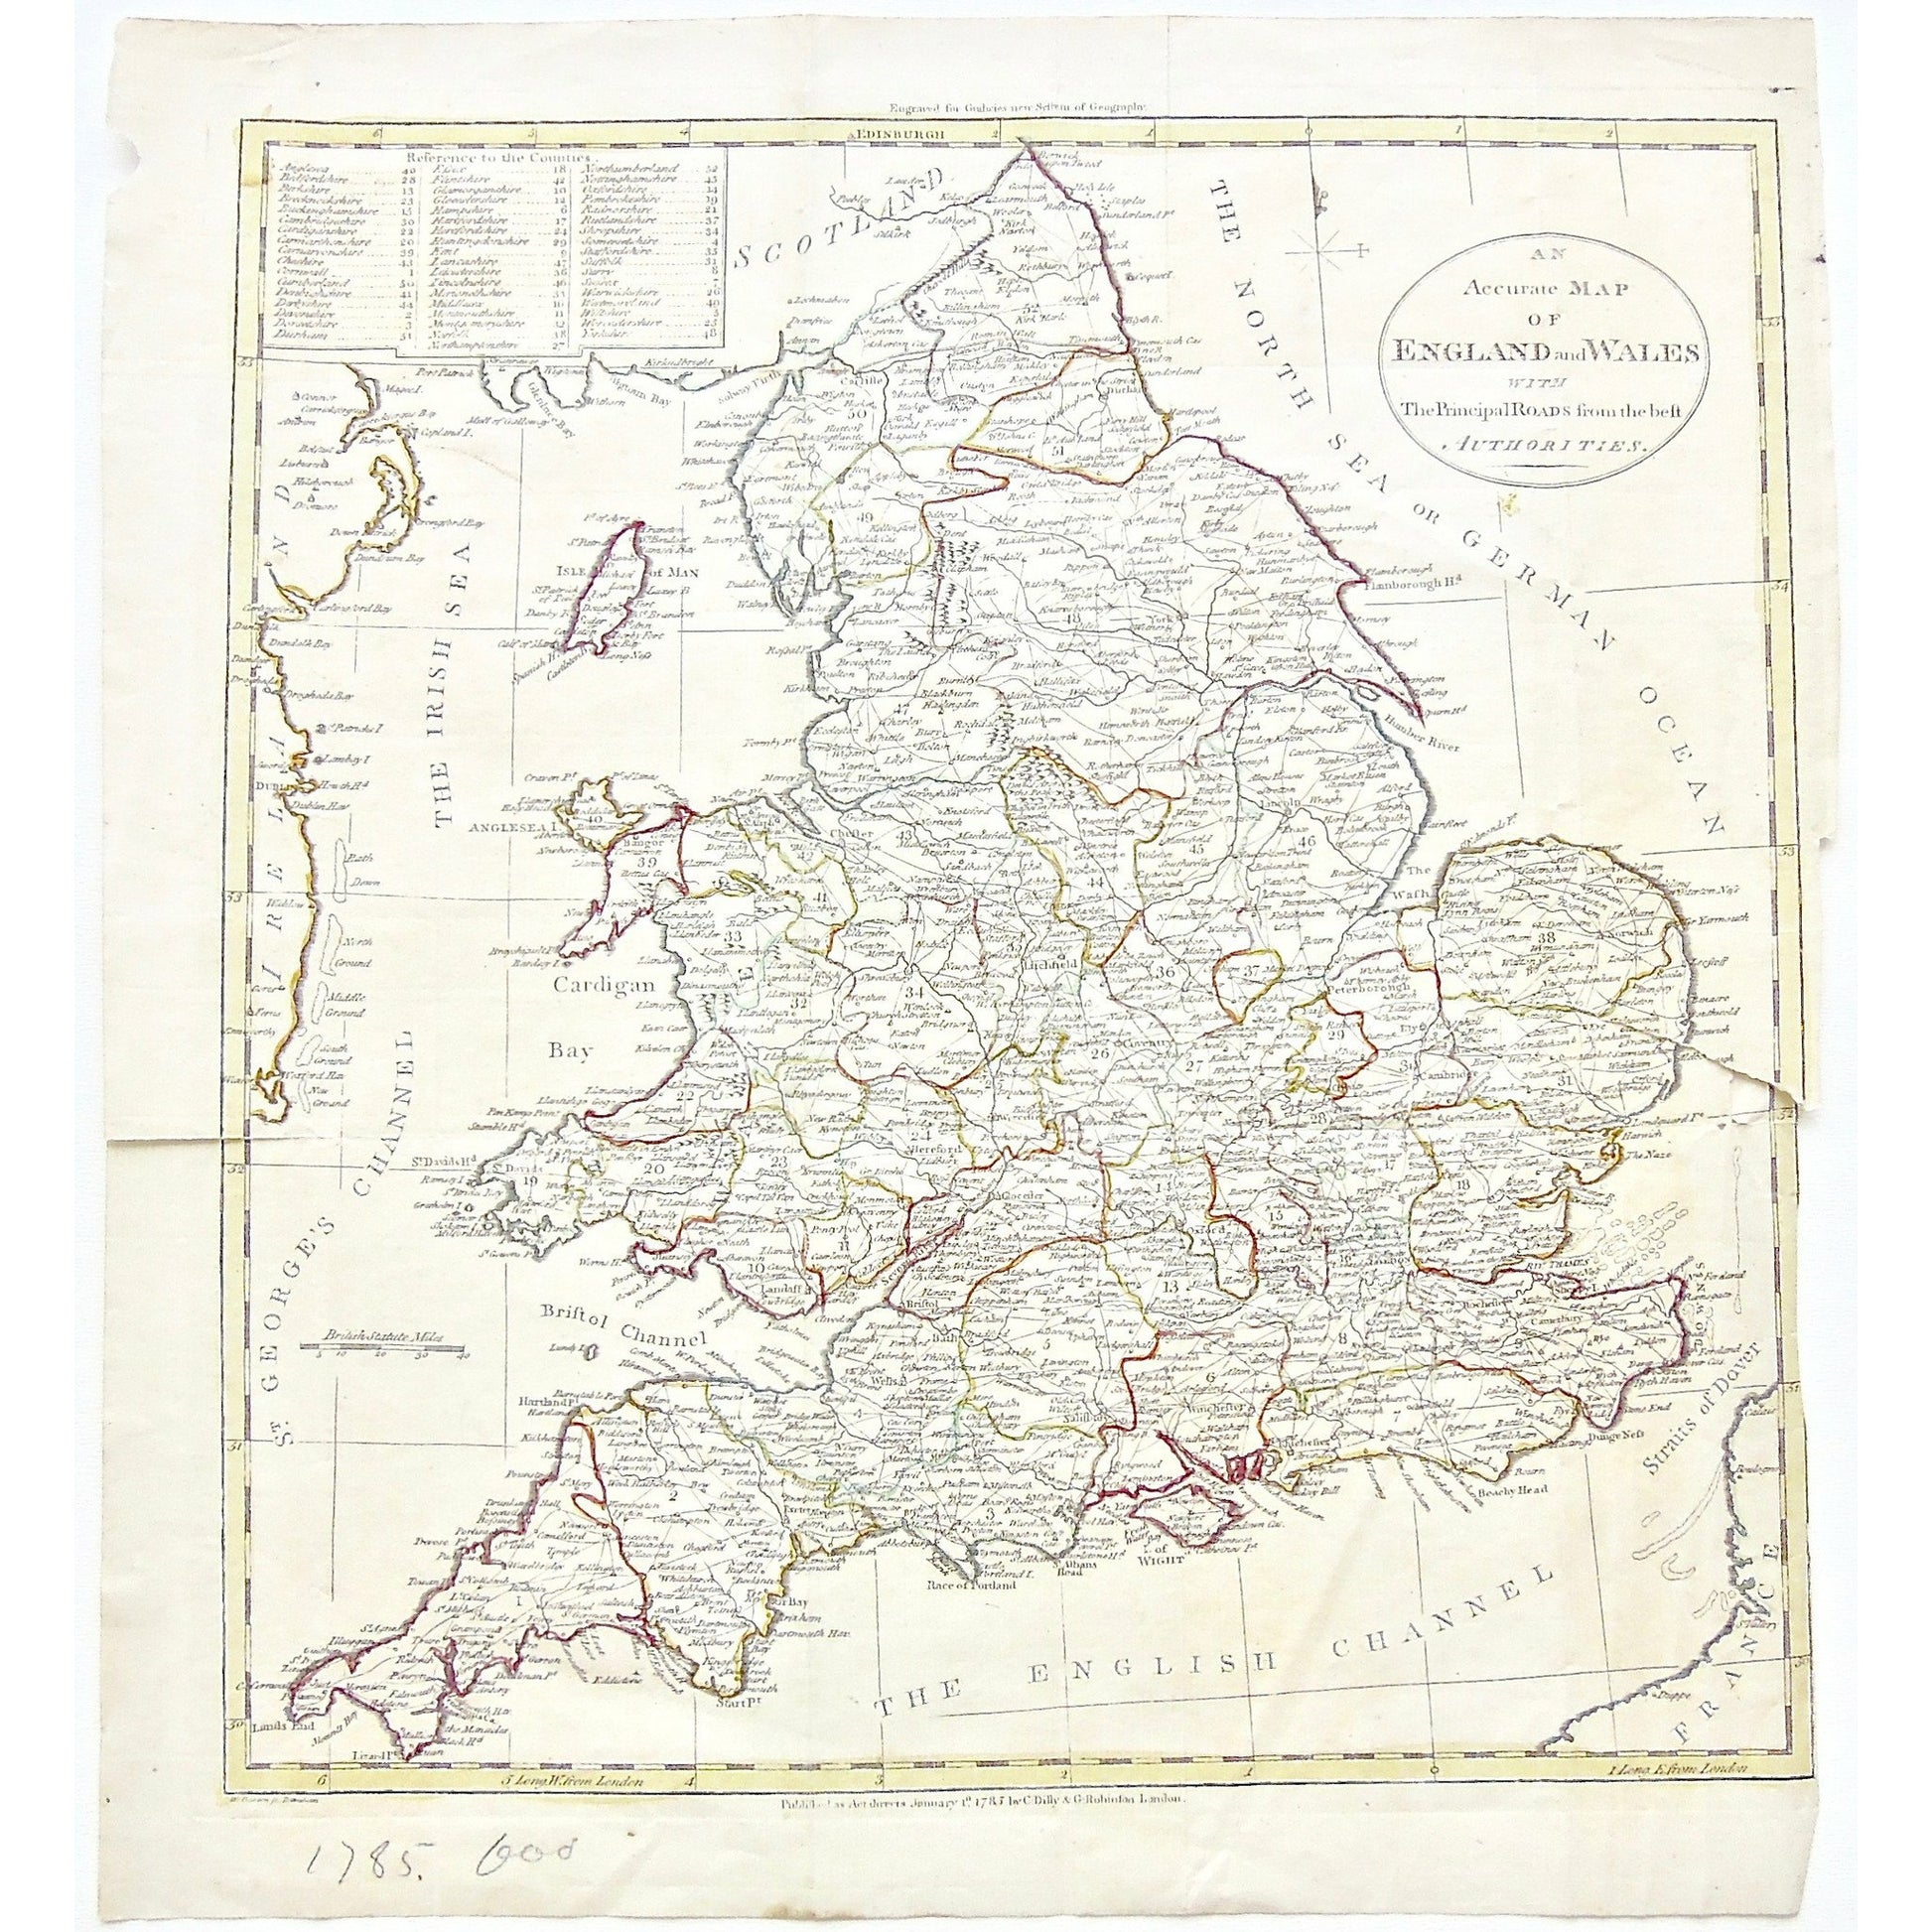 Accurate Map of England and Wales, Accurate, Map, Maps, Mapping, Chart, Charts, Charting, England, Wales, Scotland, North Sea, German Ocean, British Sea, St. George's Channel, Cardigan Bay, Bristol Channel, English Channel, Straits of Dover, Ireland, France, Isle of Man, Irish Sea, Isle of Wight, Strat point, Humber River, The Wash, Anglesea Island, Anglesea, 1785, C. Dilly, Dilly, G. Robinson, Robinson, Guthrie's New System of Geography, Guthrie, Guthrie's, New System of Geography, Copperplate, Copper, Eng